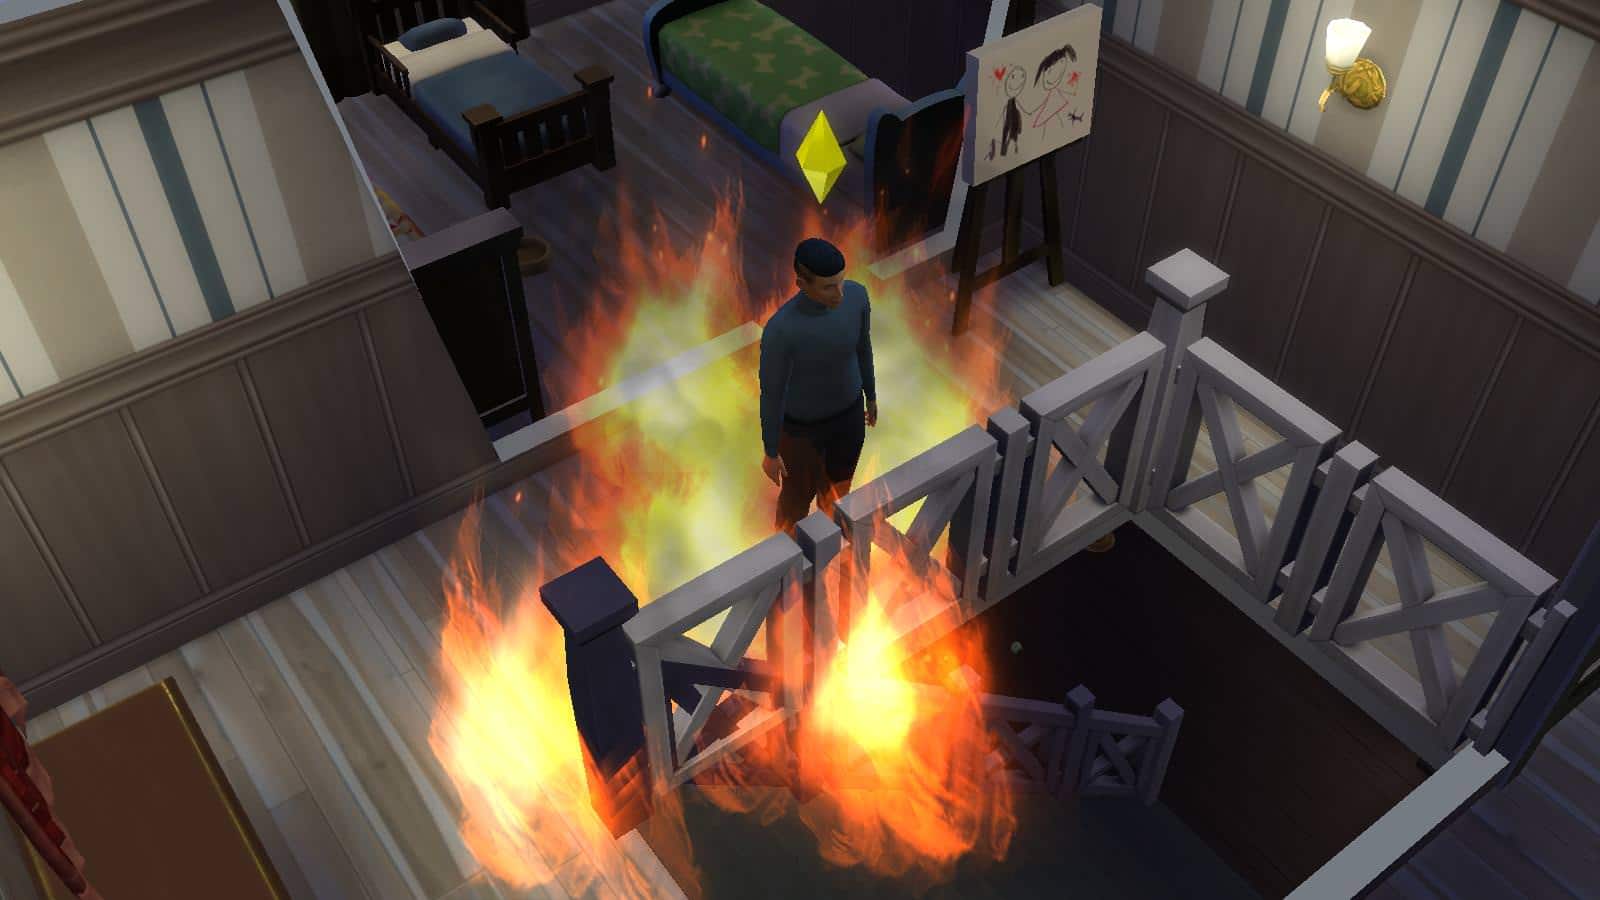 A Sim in his home, starting a fire.